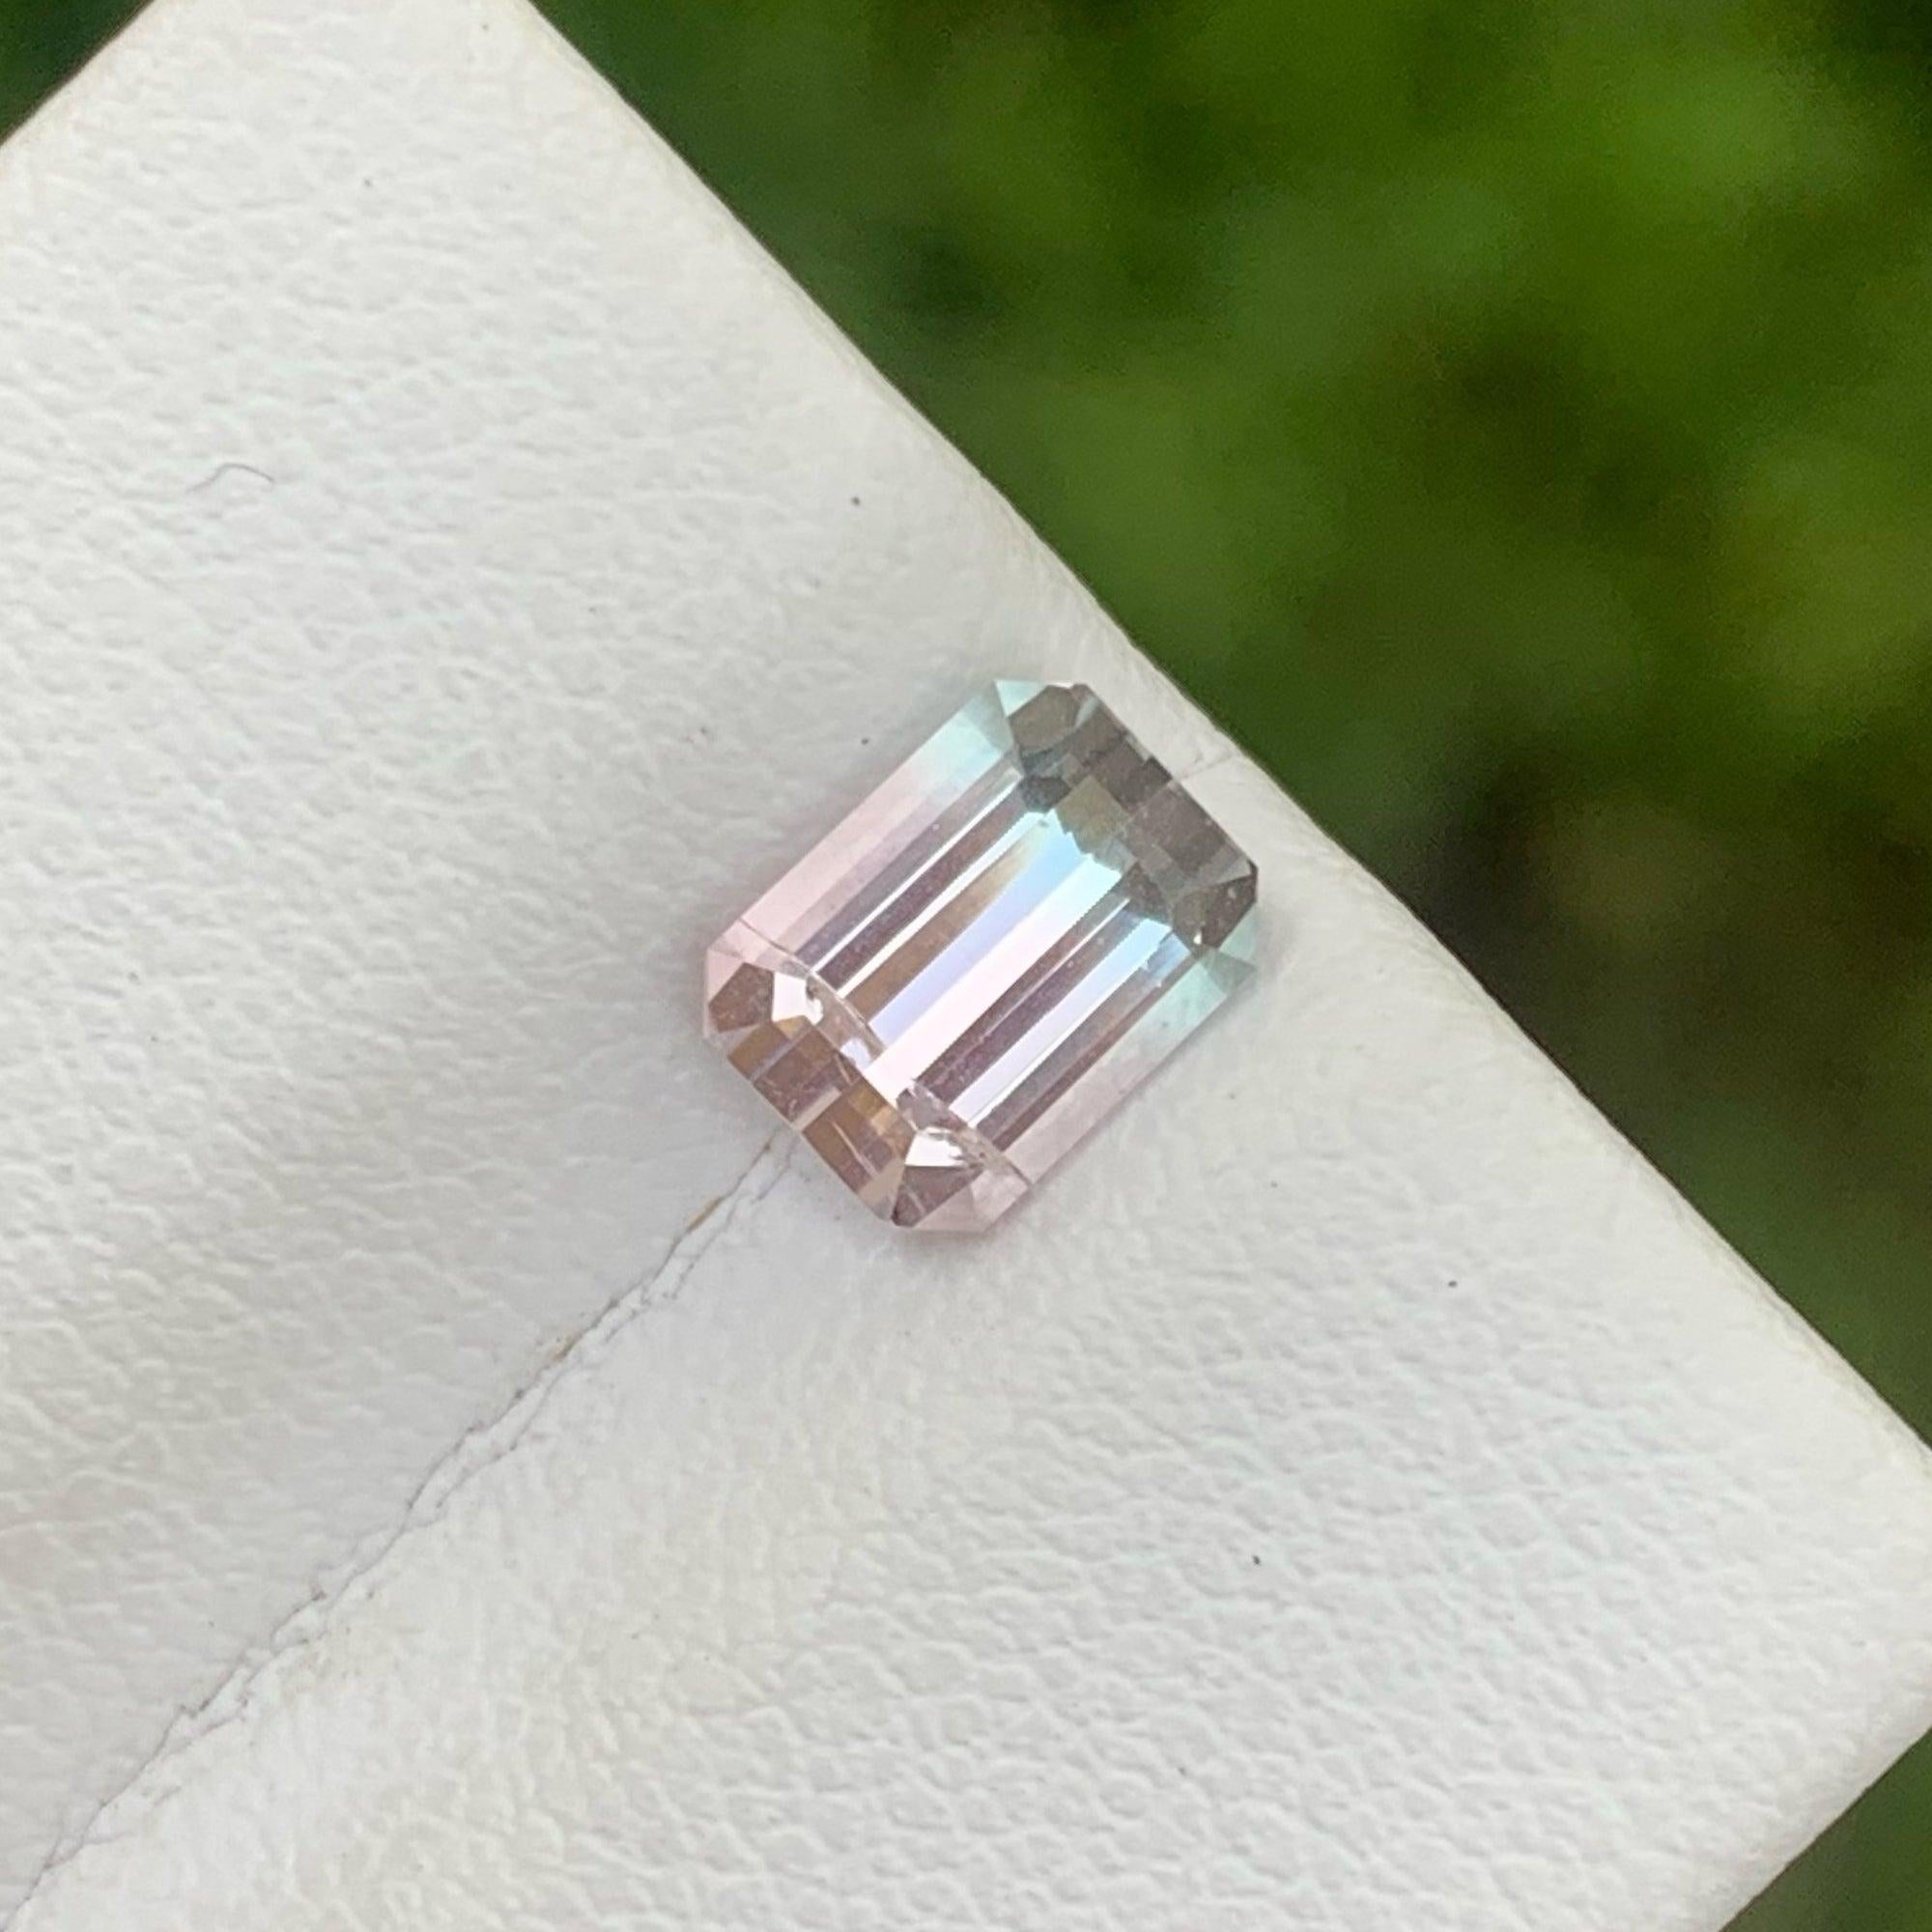 Emerald Cut Lovely Bicolor Tourmaline Cut Gemstone 1.25 CT Afghan Tourmaline for Jewelry For Sale